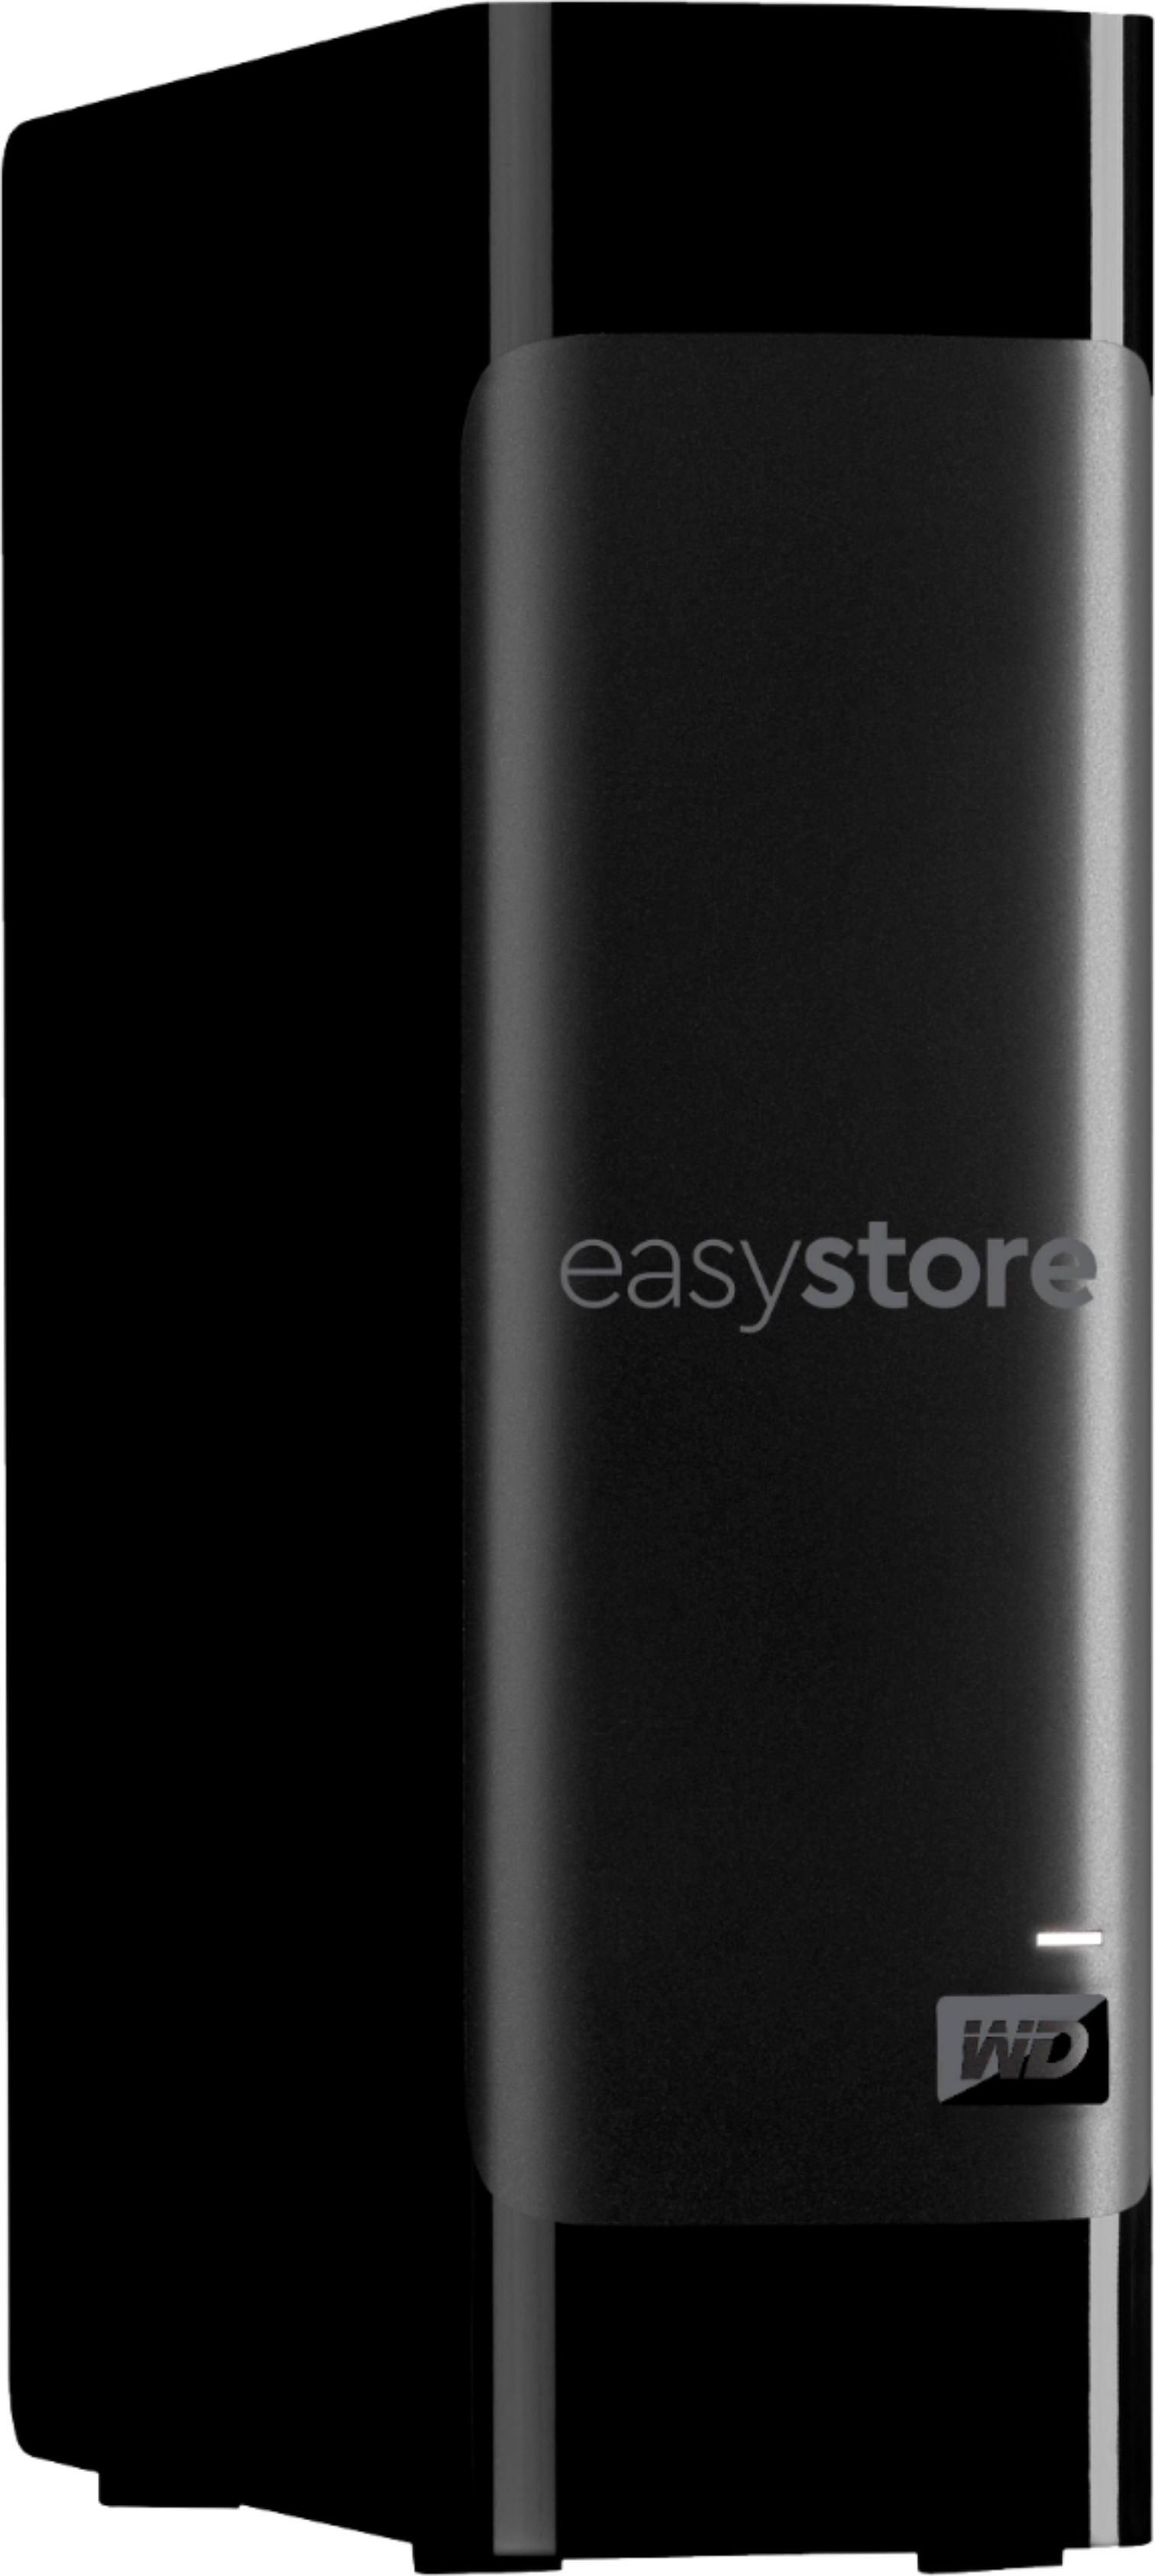 Angle View: WD - Easystore 128GB USB 3.0 Flash Drive - Blue